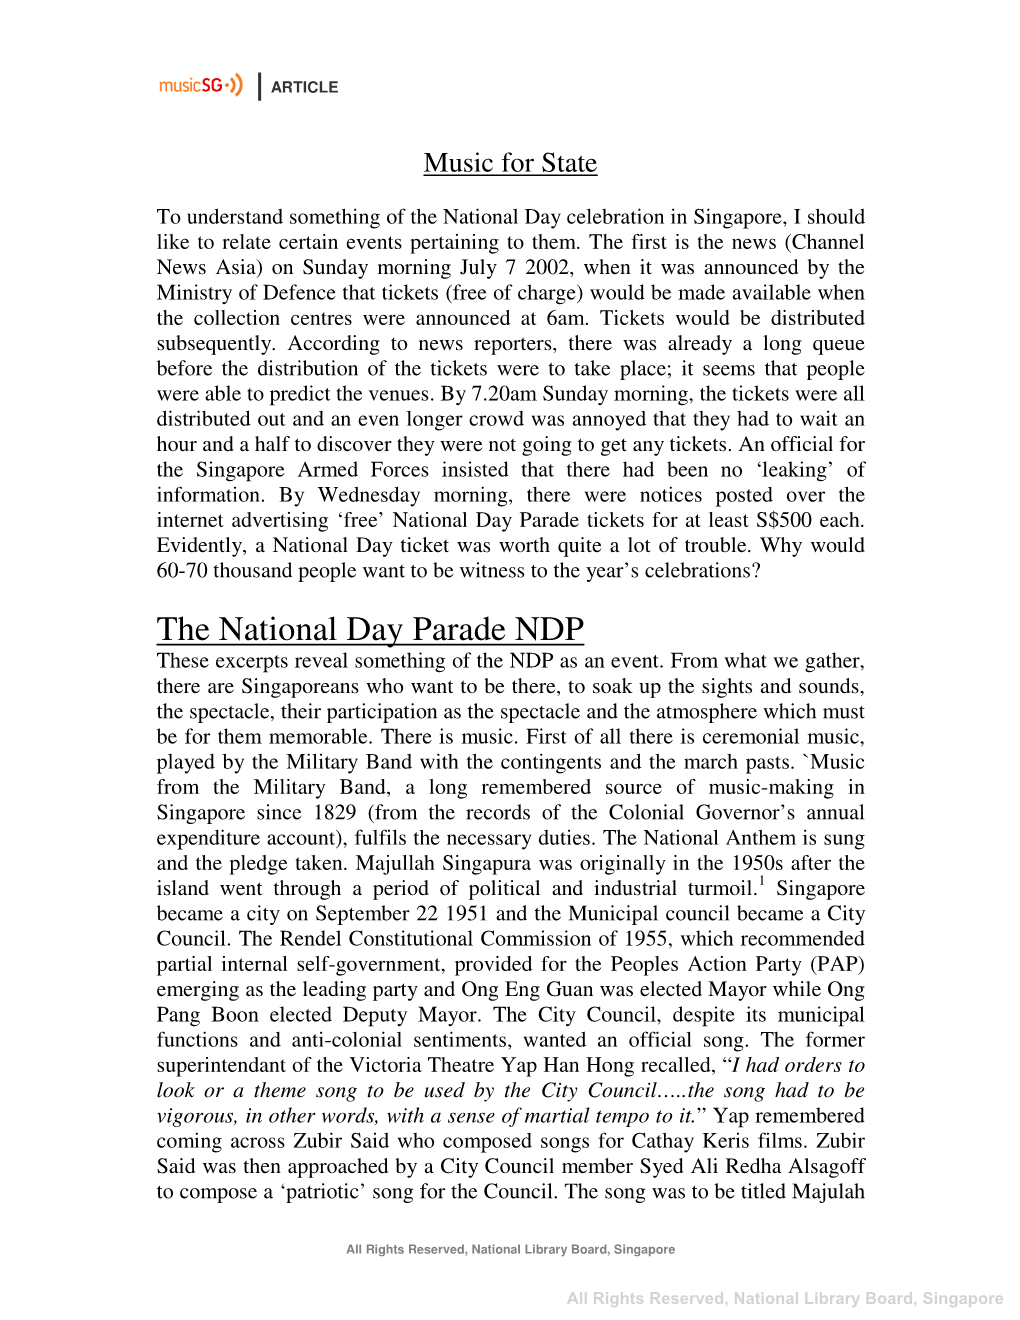 The National Day Parade NDP These Excerpts Reveal Something of the NDP As an Event